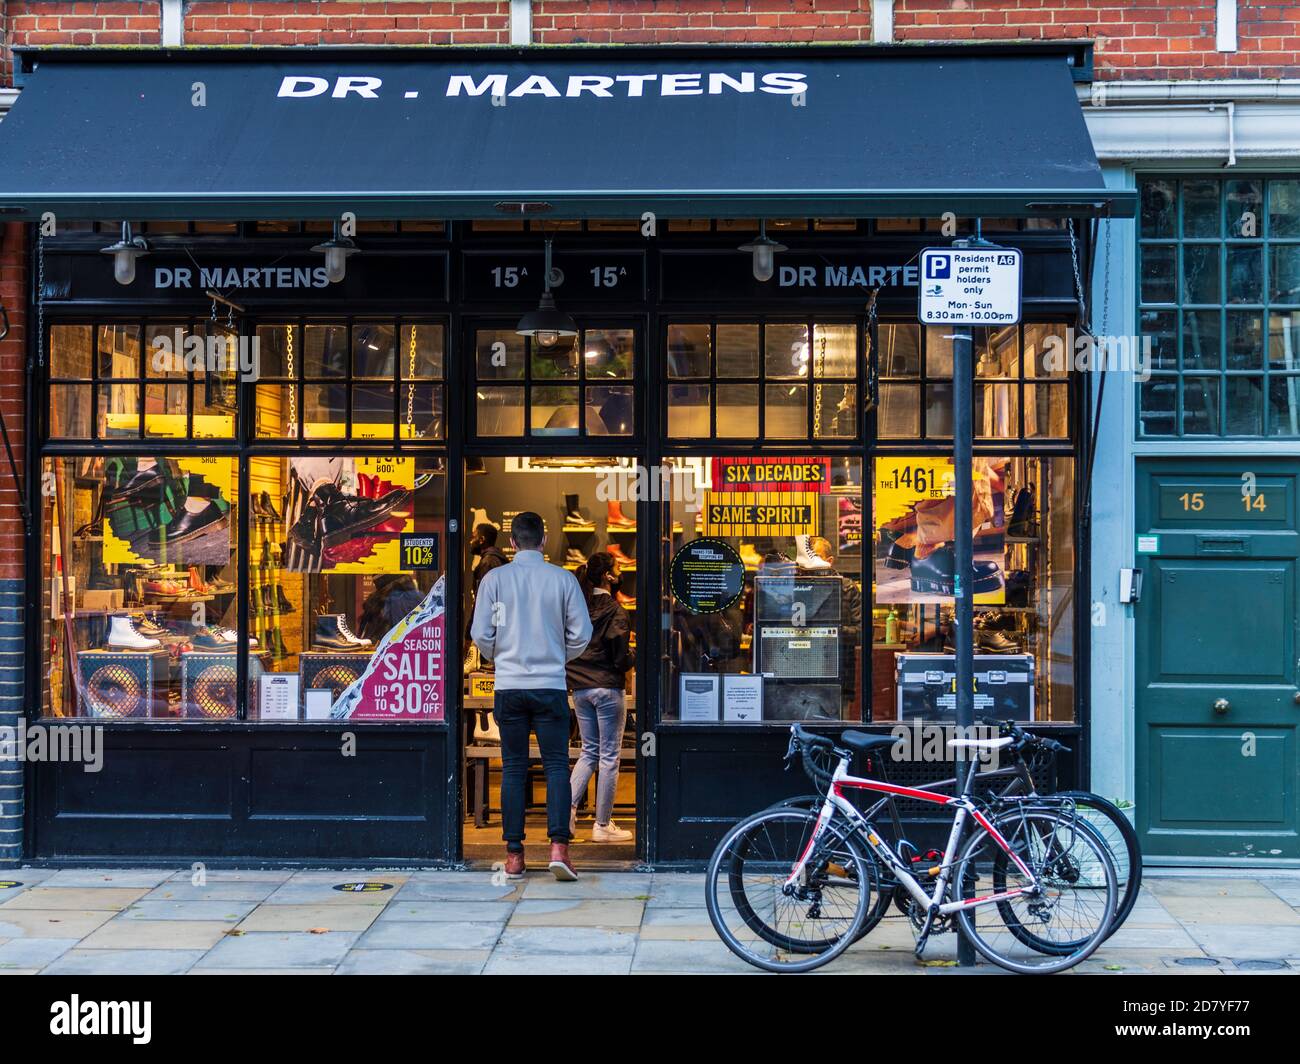 Dr Martens Store Spitalfields Market East London. Dr. Martens is an Iconic British footwear brand founded in 1947 by Klaus Märtens. Stock Photo